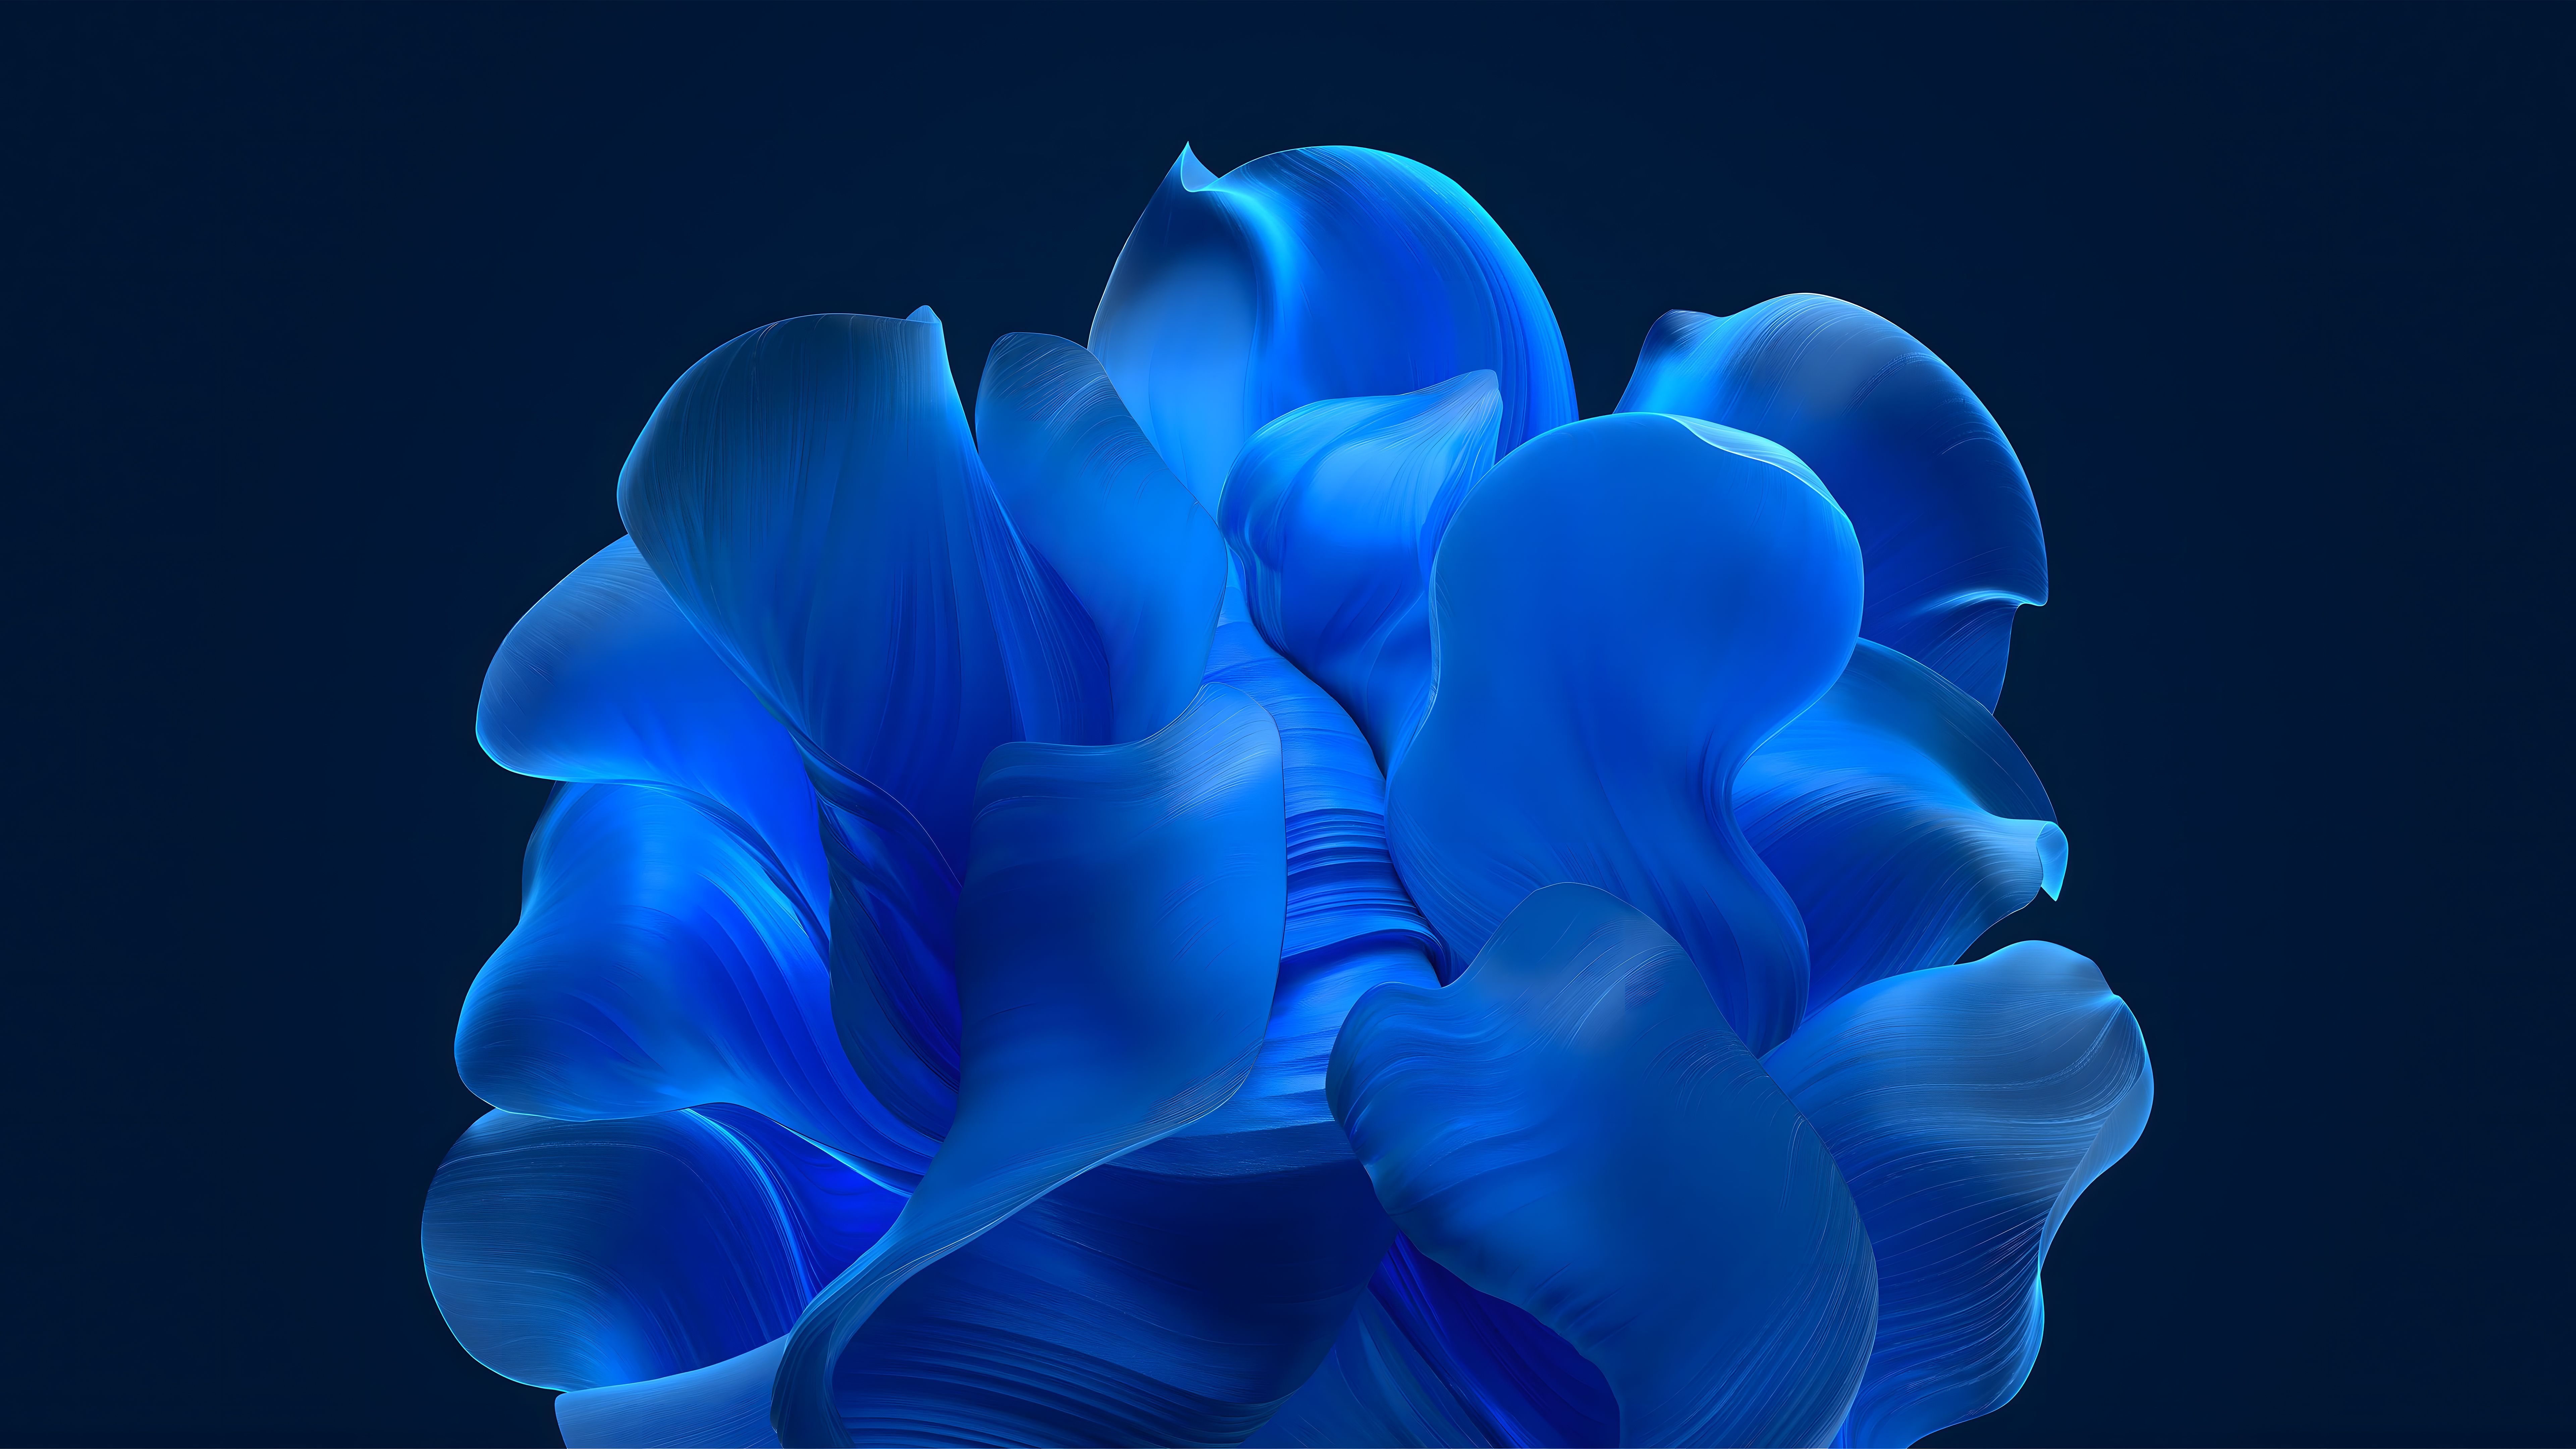 Windows 11 Wallpaper 4K, Blue aesthetic, Bloom collection